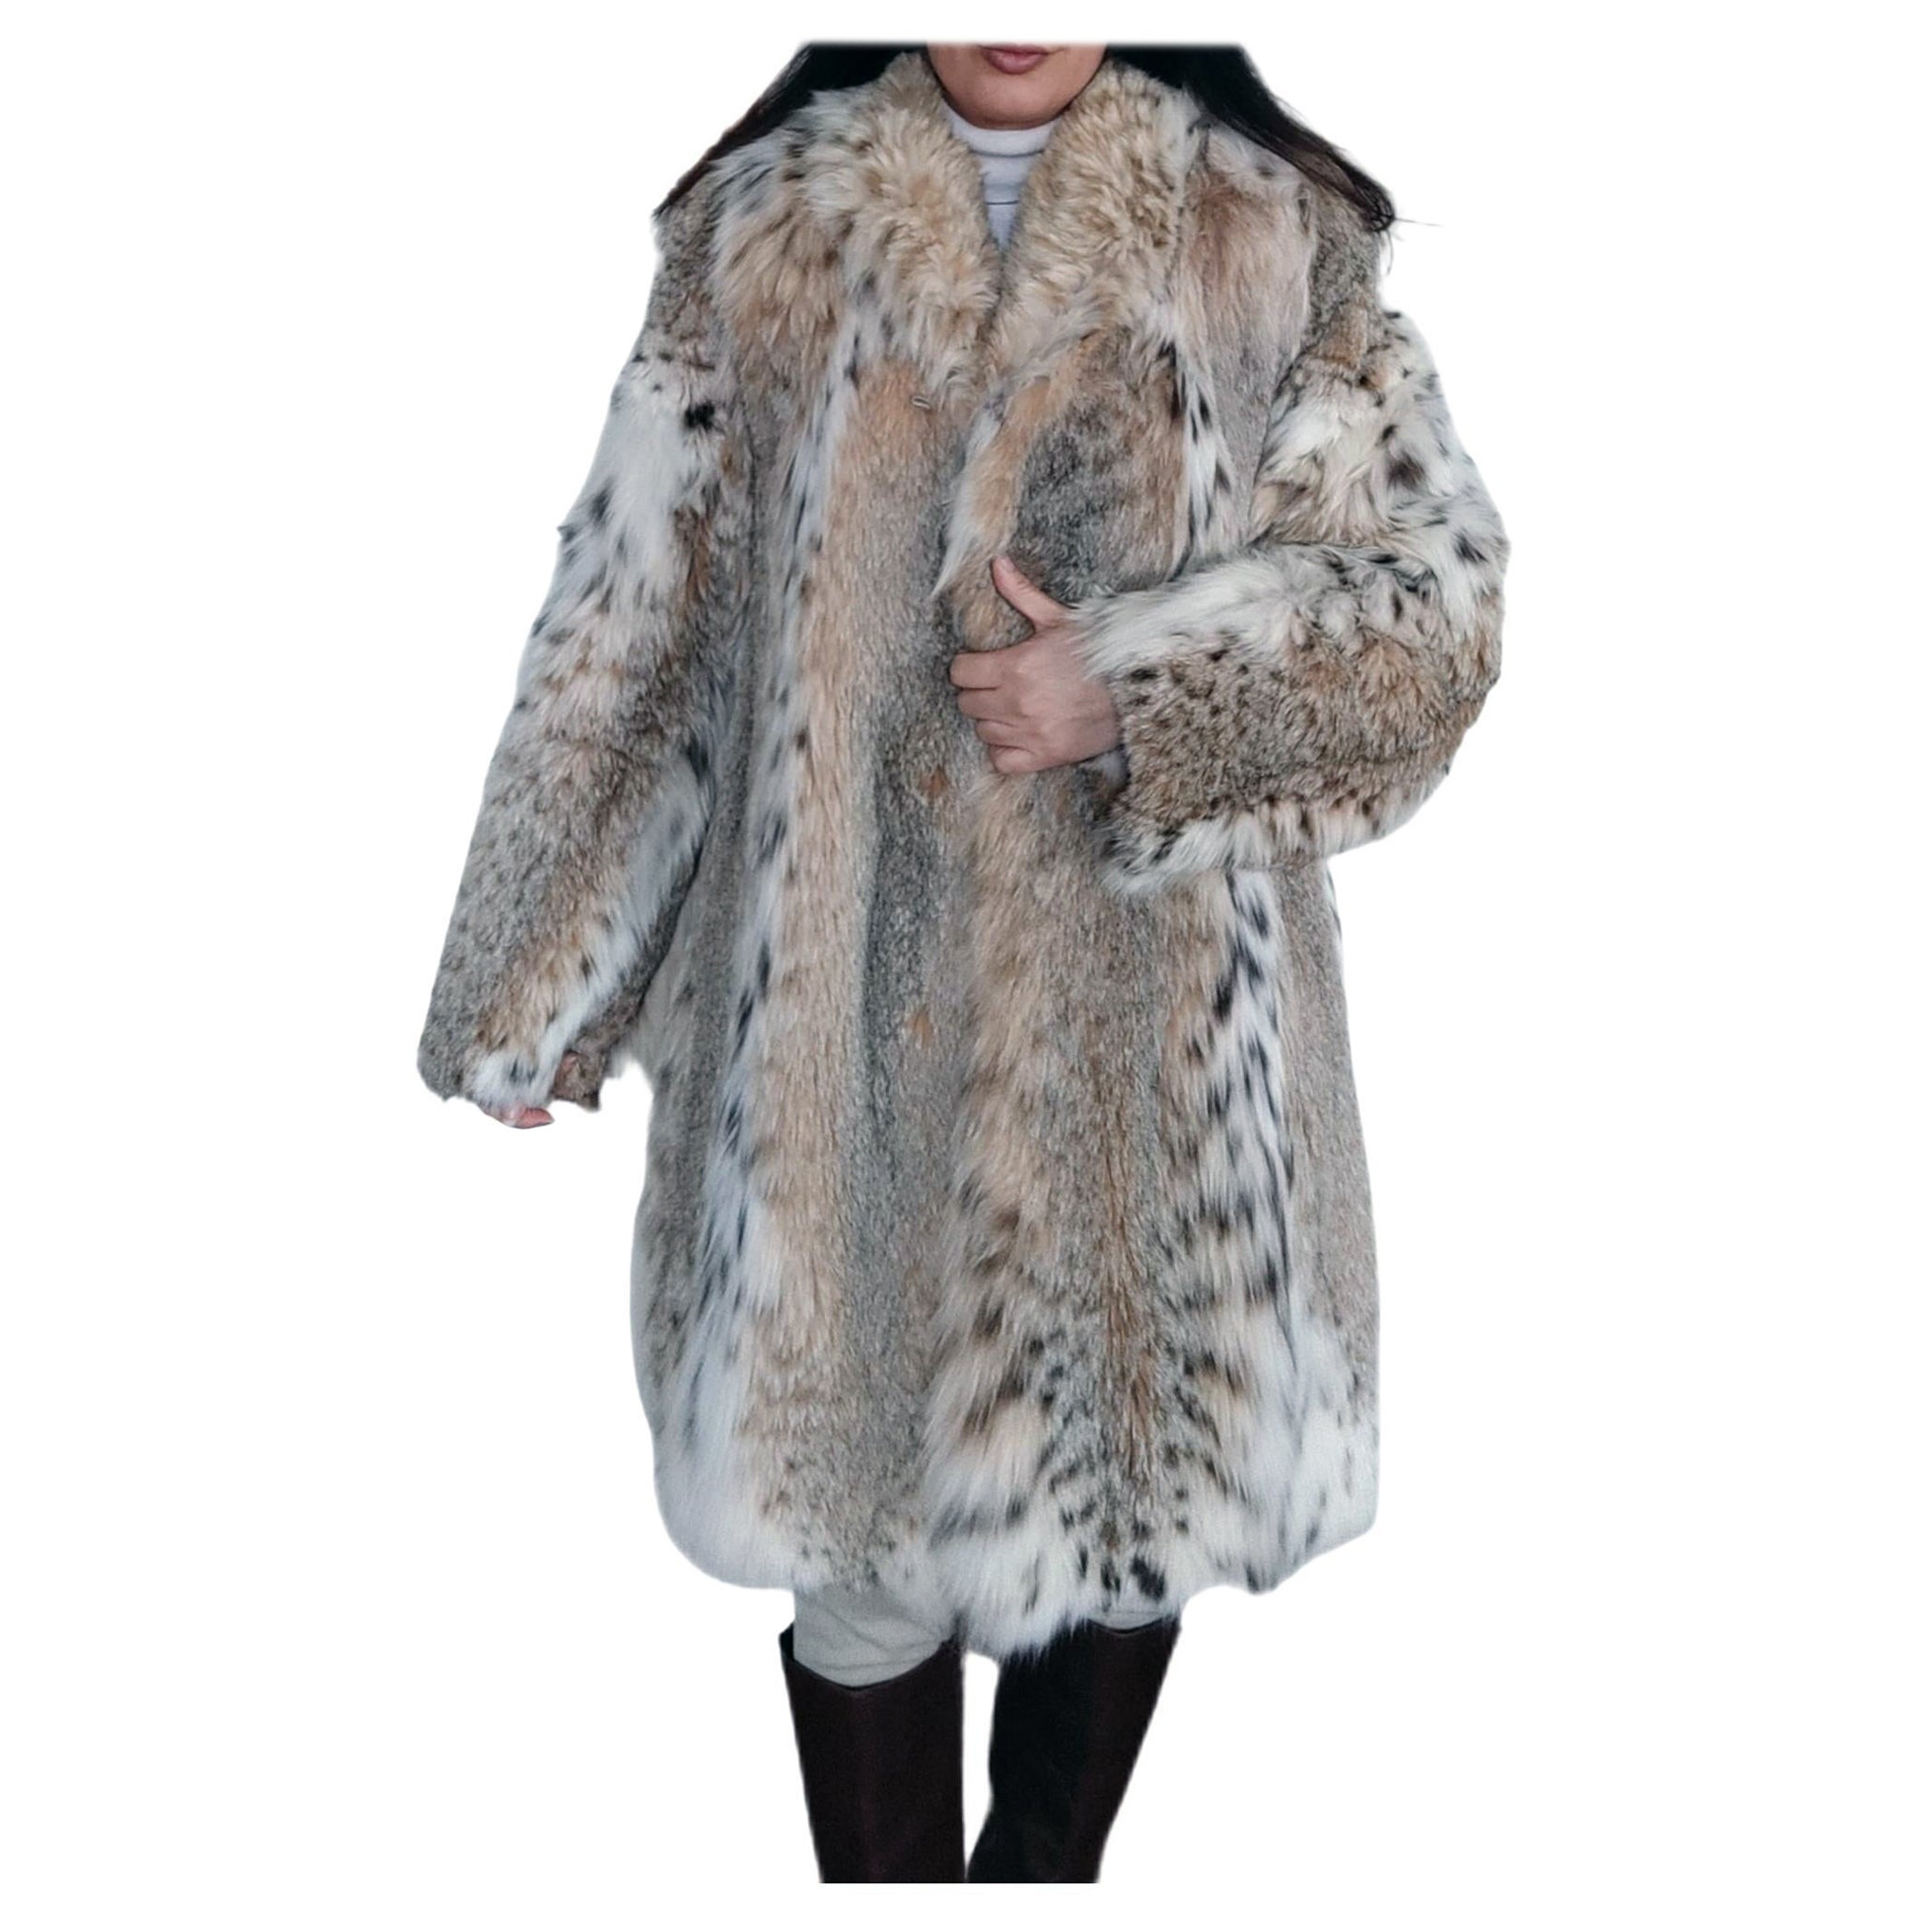 How much is a lynx fur coat worth?